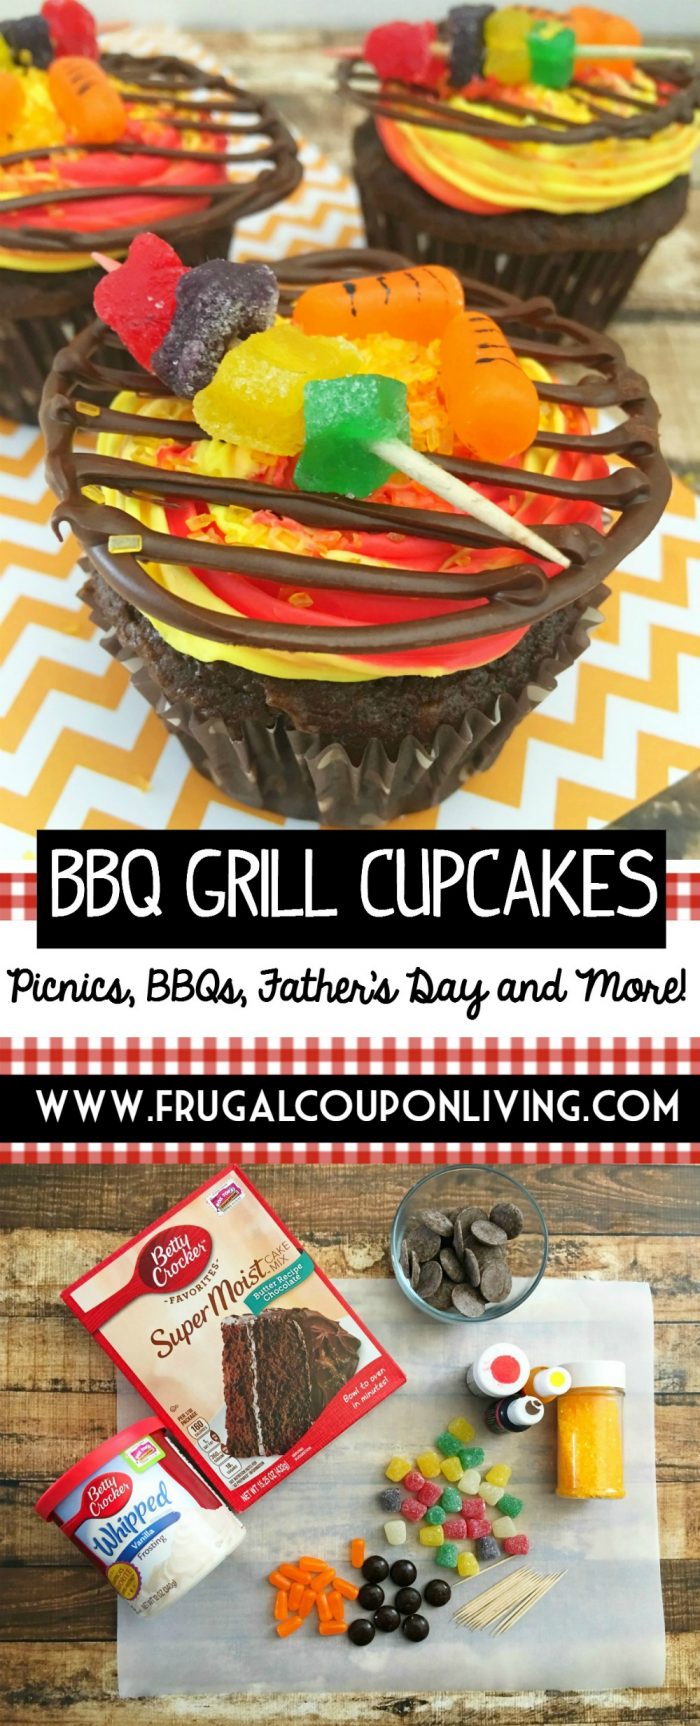 bbq-grill-cupcakes-frugal-coupon-living-shorter